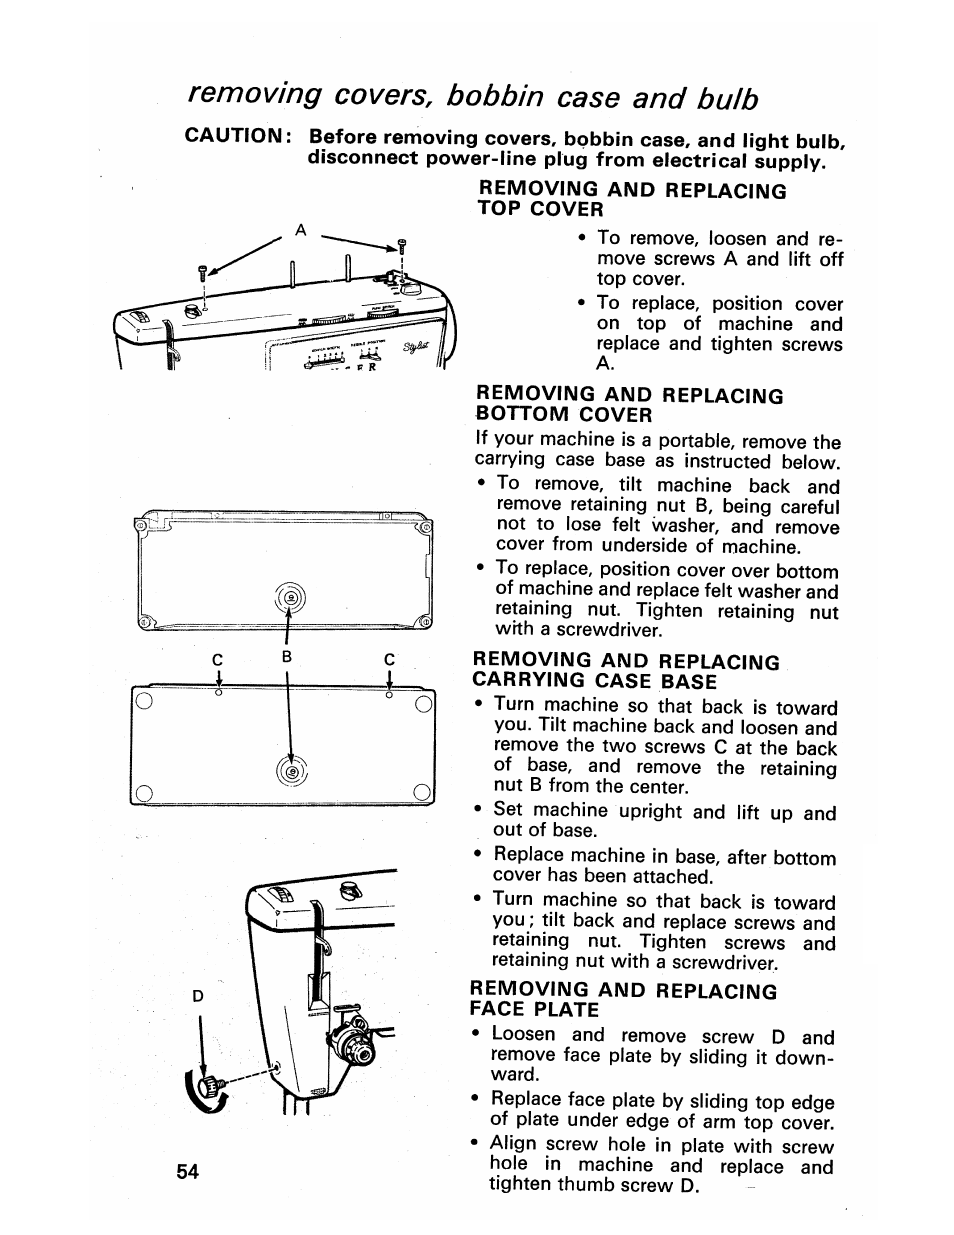 Removing covers, bobbin case and bulb, Removing cover, bobbin case, and bulb | SINGER 413 User Manual | Page 56 / 64